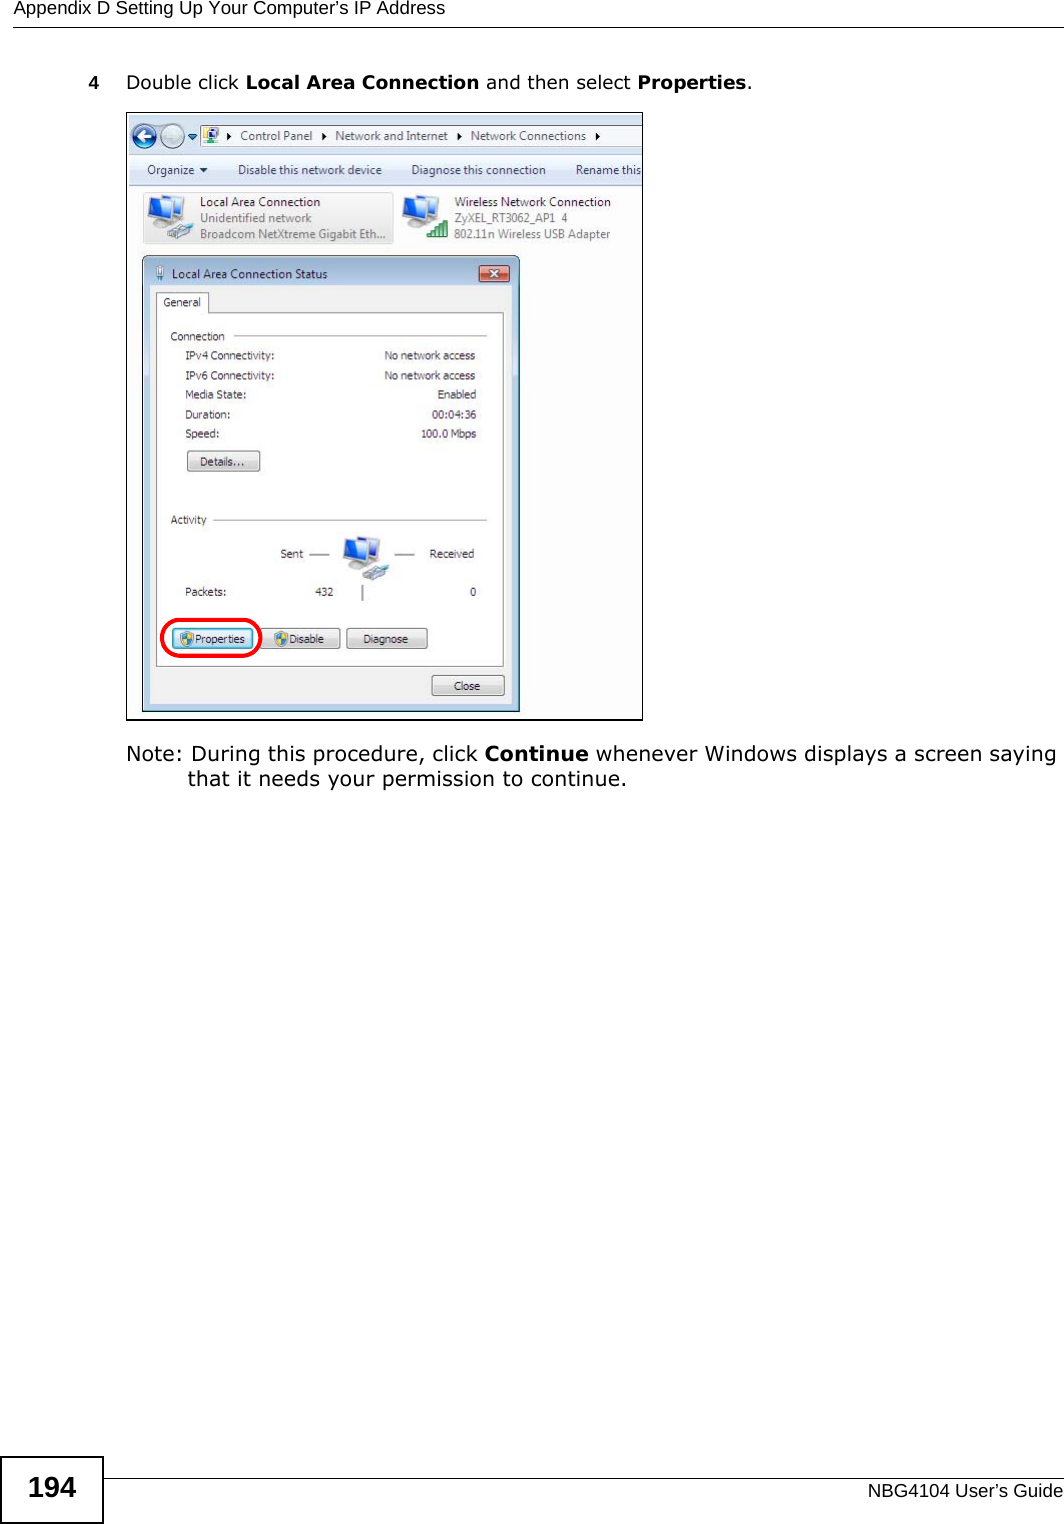 Appendix D Setting Up Your Computer’s IP AddressNBG4104 User’s Guide1944Double click Local Area Connection and then select Properties.Note: During this procedure, click Continue whenever Windows displays a screen saying that it needs your permission to continue.